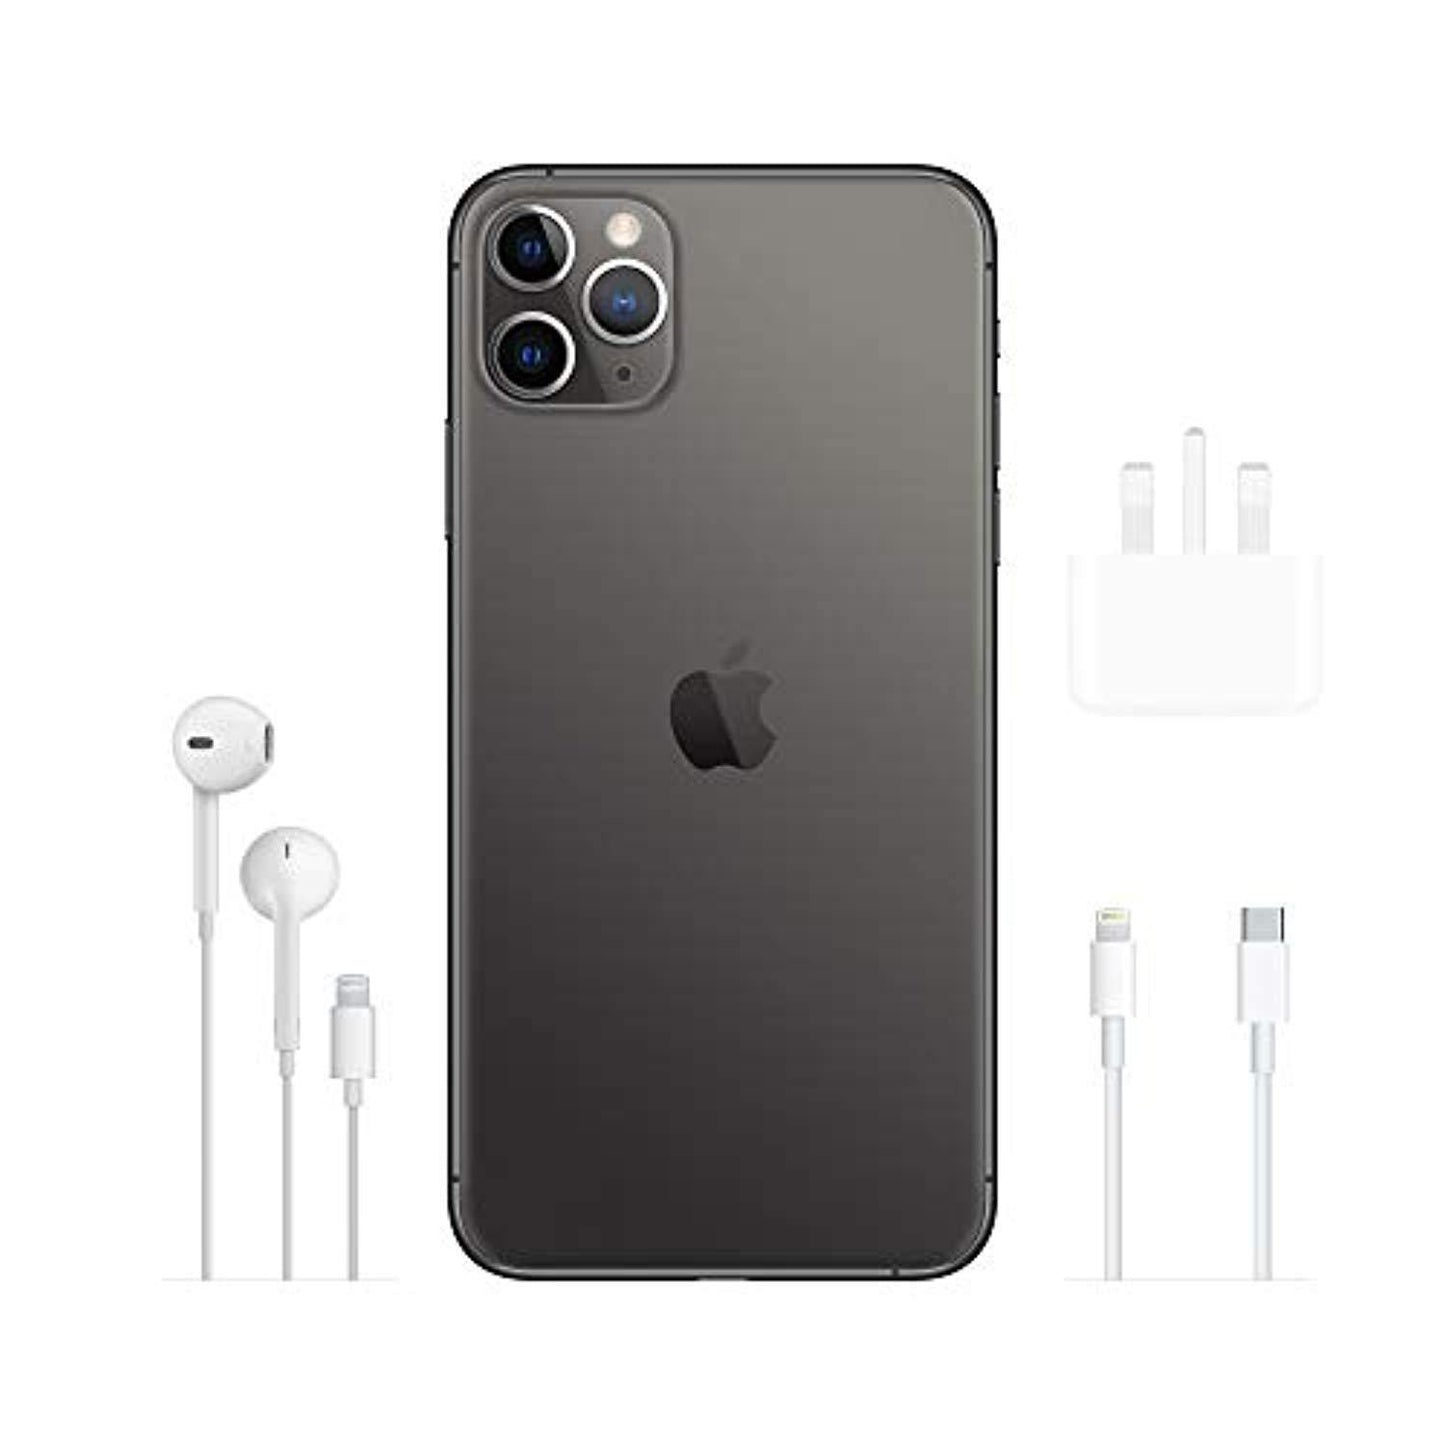 Apple iPhone 11 Pro Max (64GB) - Space Grey - Offer Games